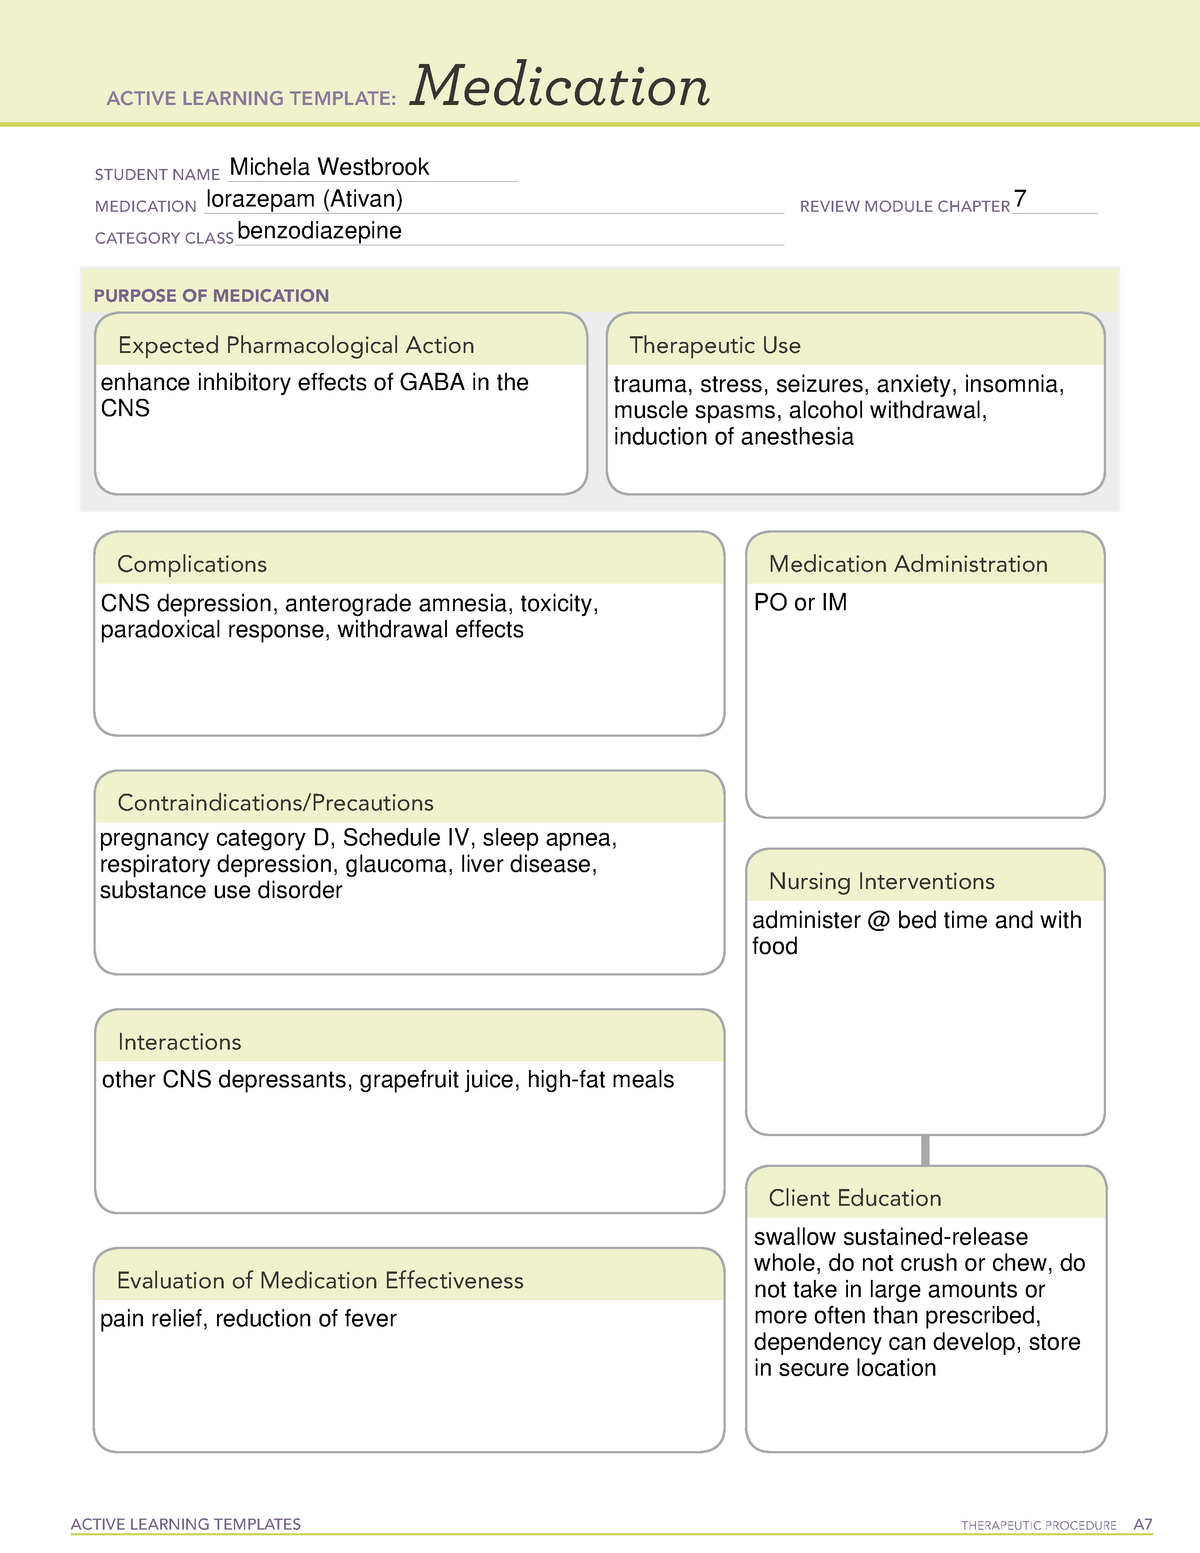 ATI medication template lorazepam ACTIVE LEARNING TEMPLATES